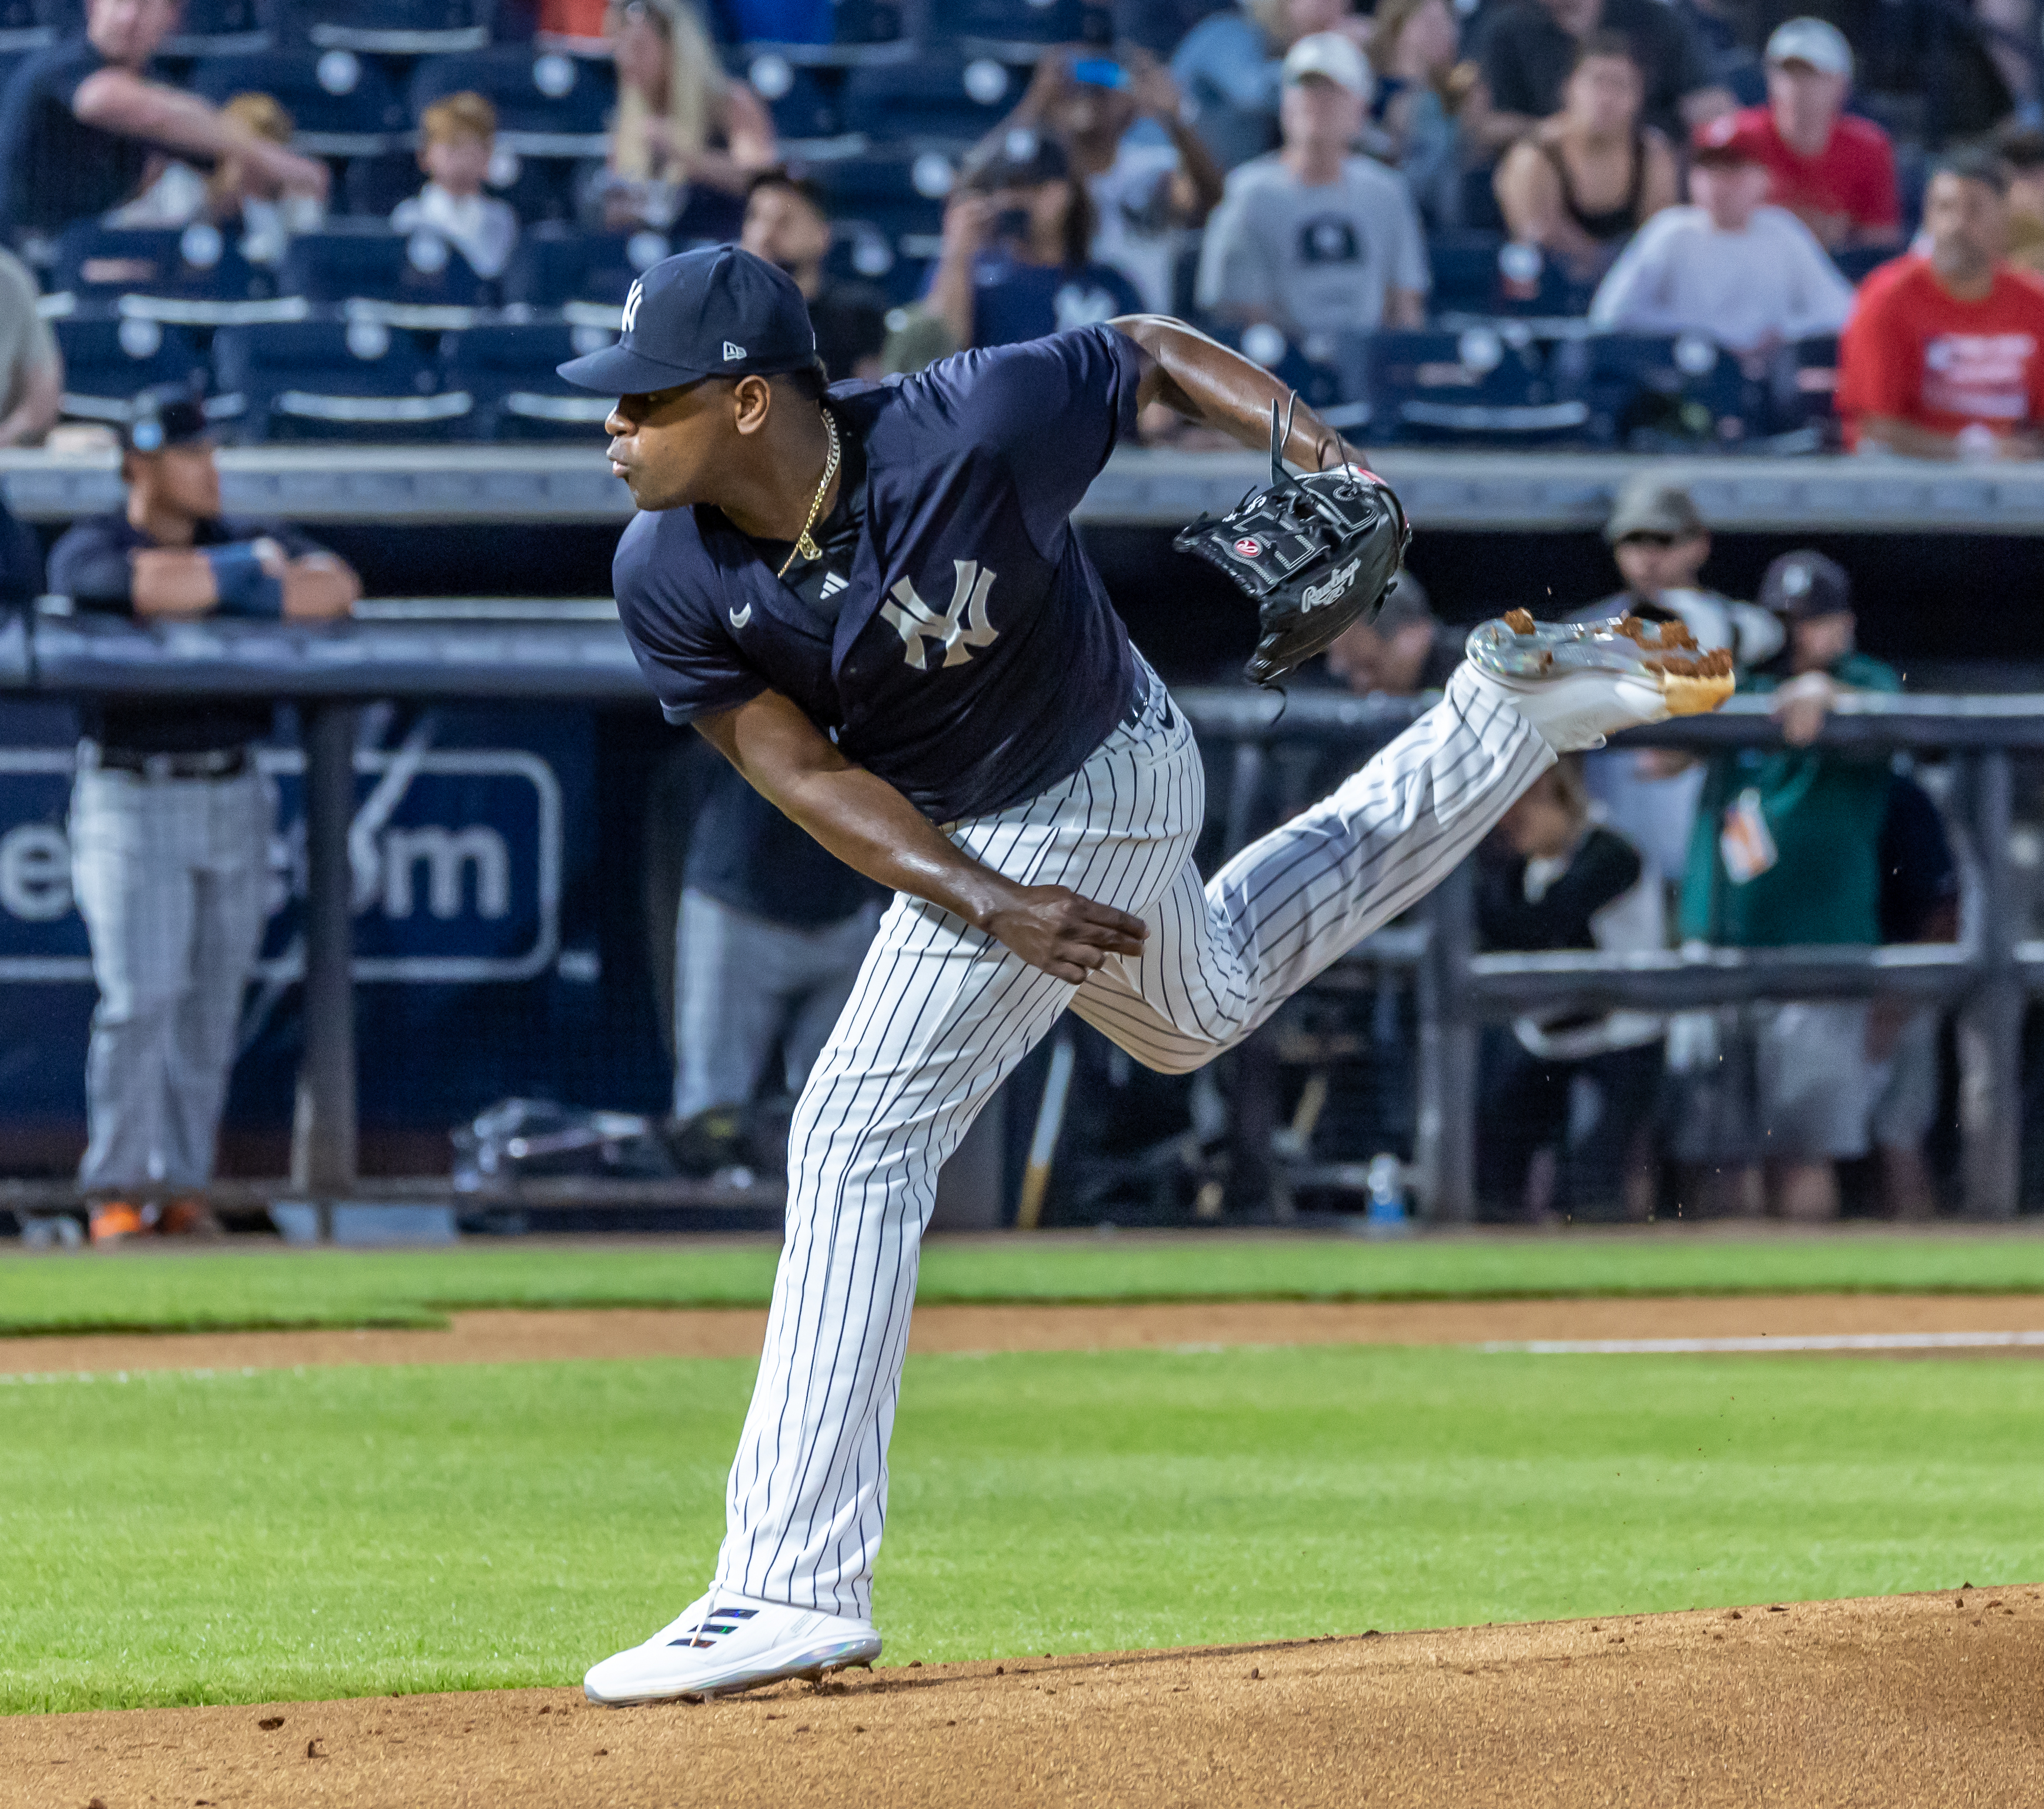 New York Yankees Luis Severino pitching in a spring training game